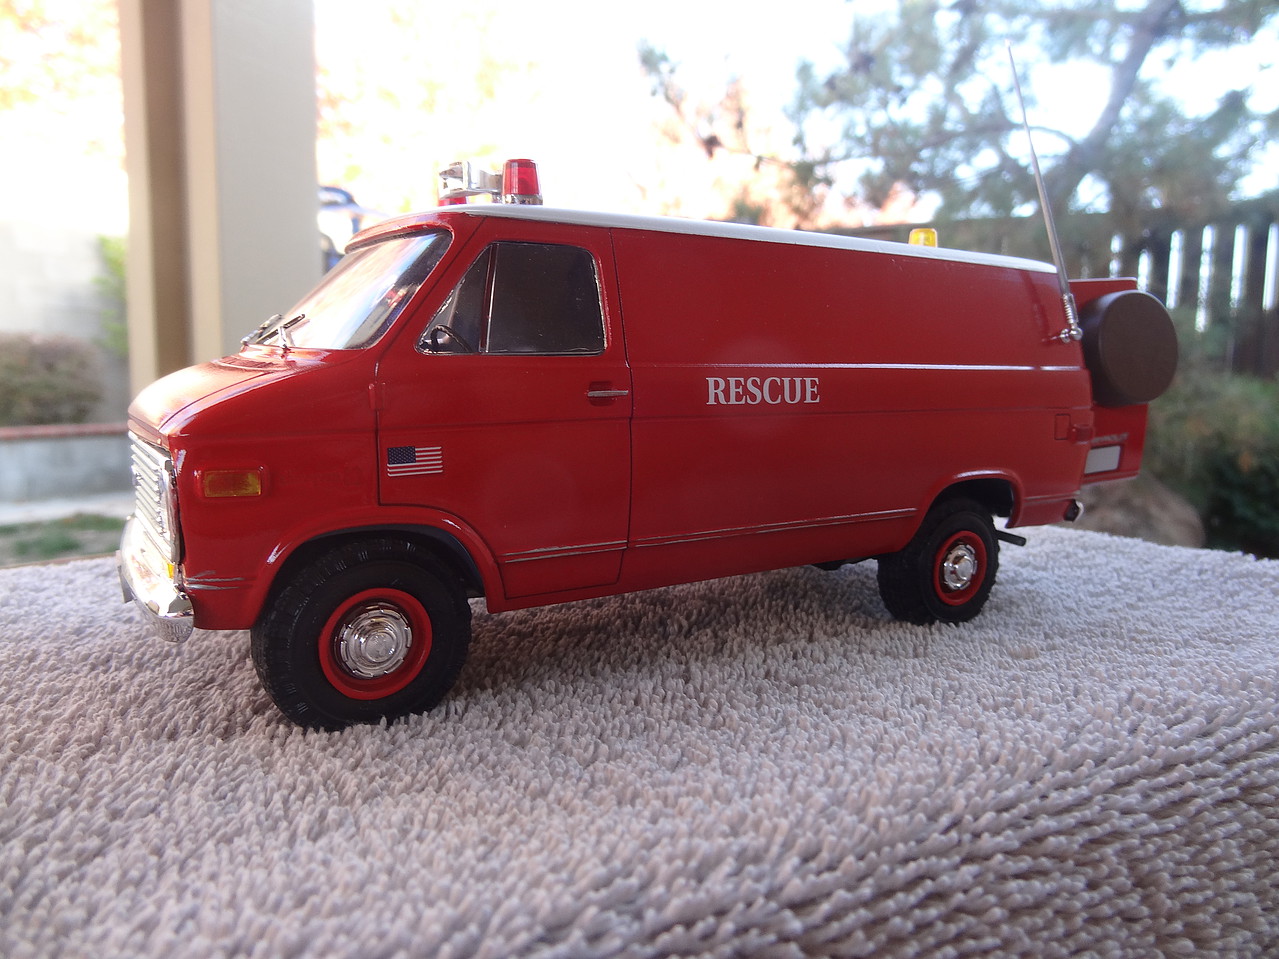 Red AMT 1:25 Scale Plastic 1975 Chevy Rescue Van Model Kit